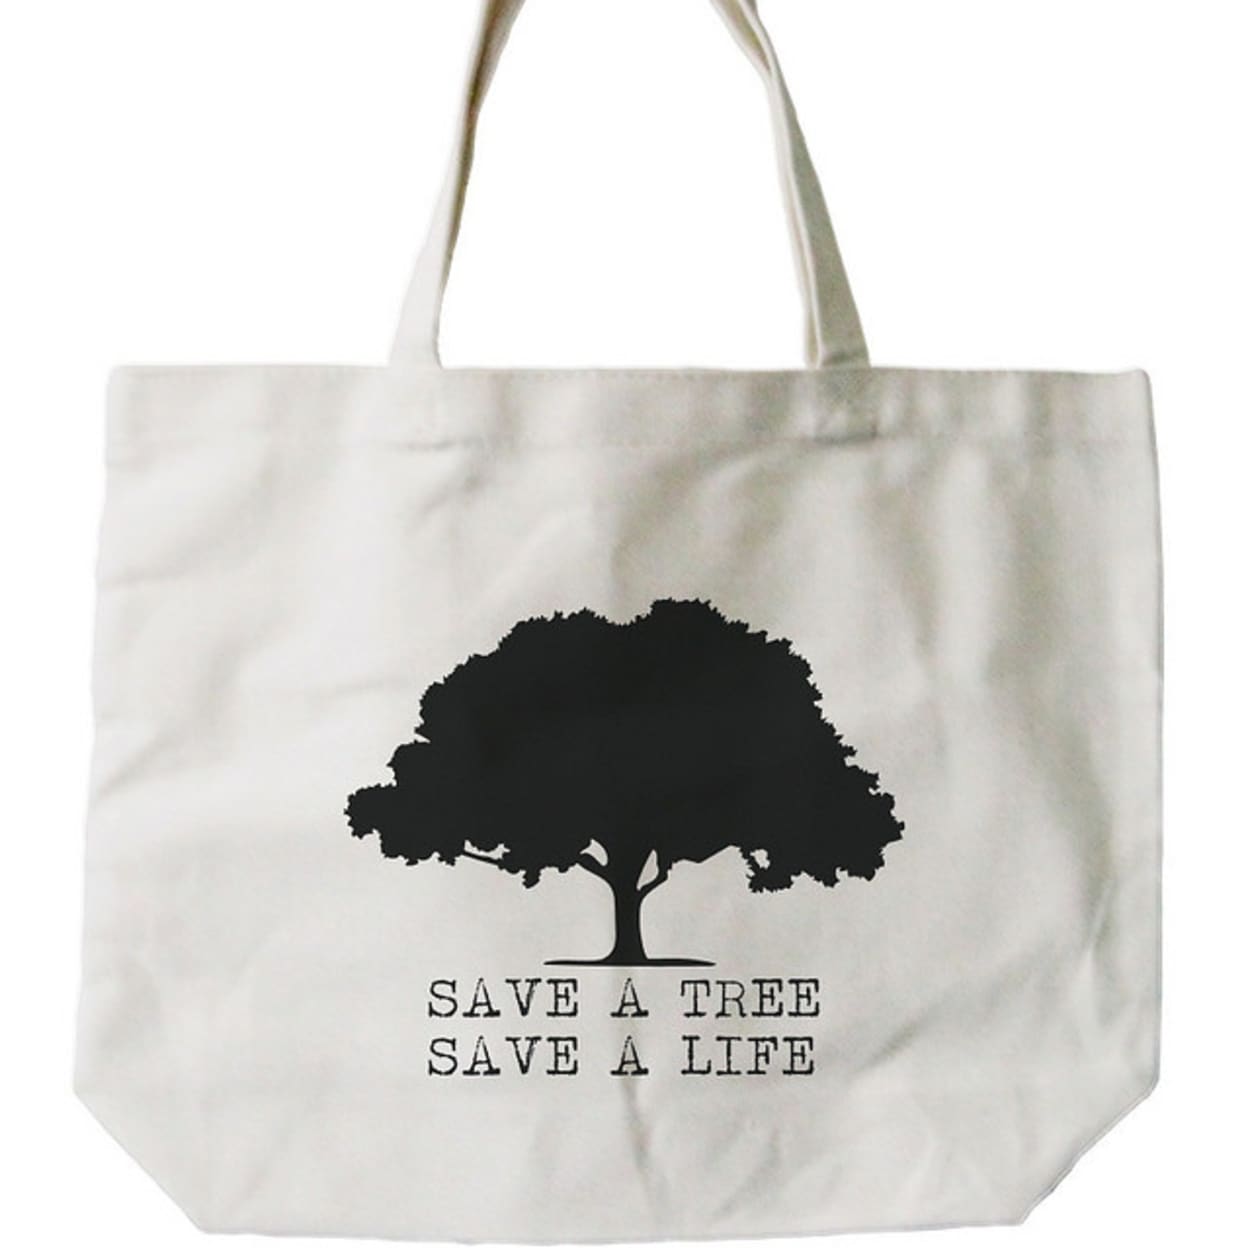 Save A Tree Save A Life Canvas Bags Cute Earth day Totes for Grocery or School